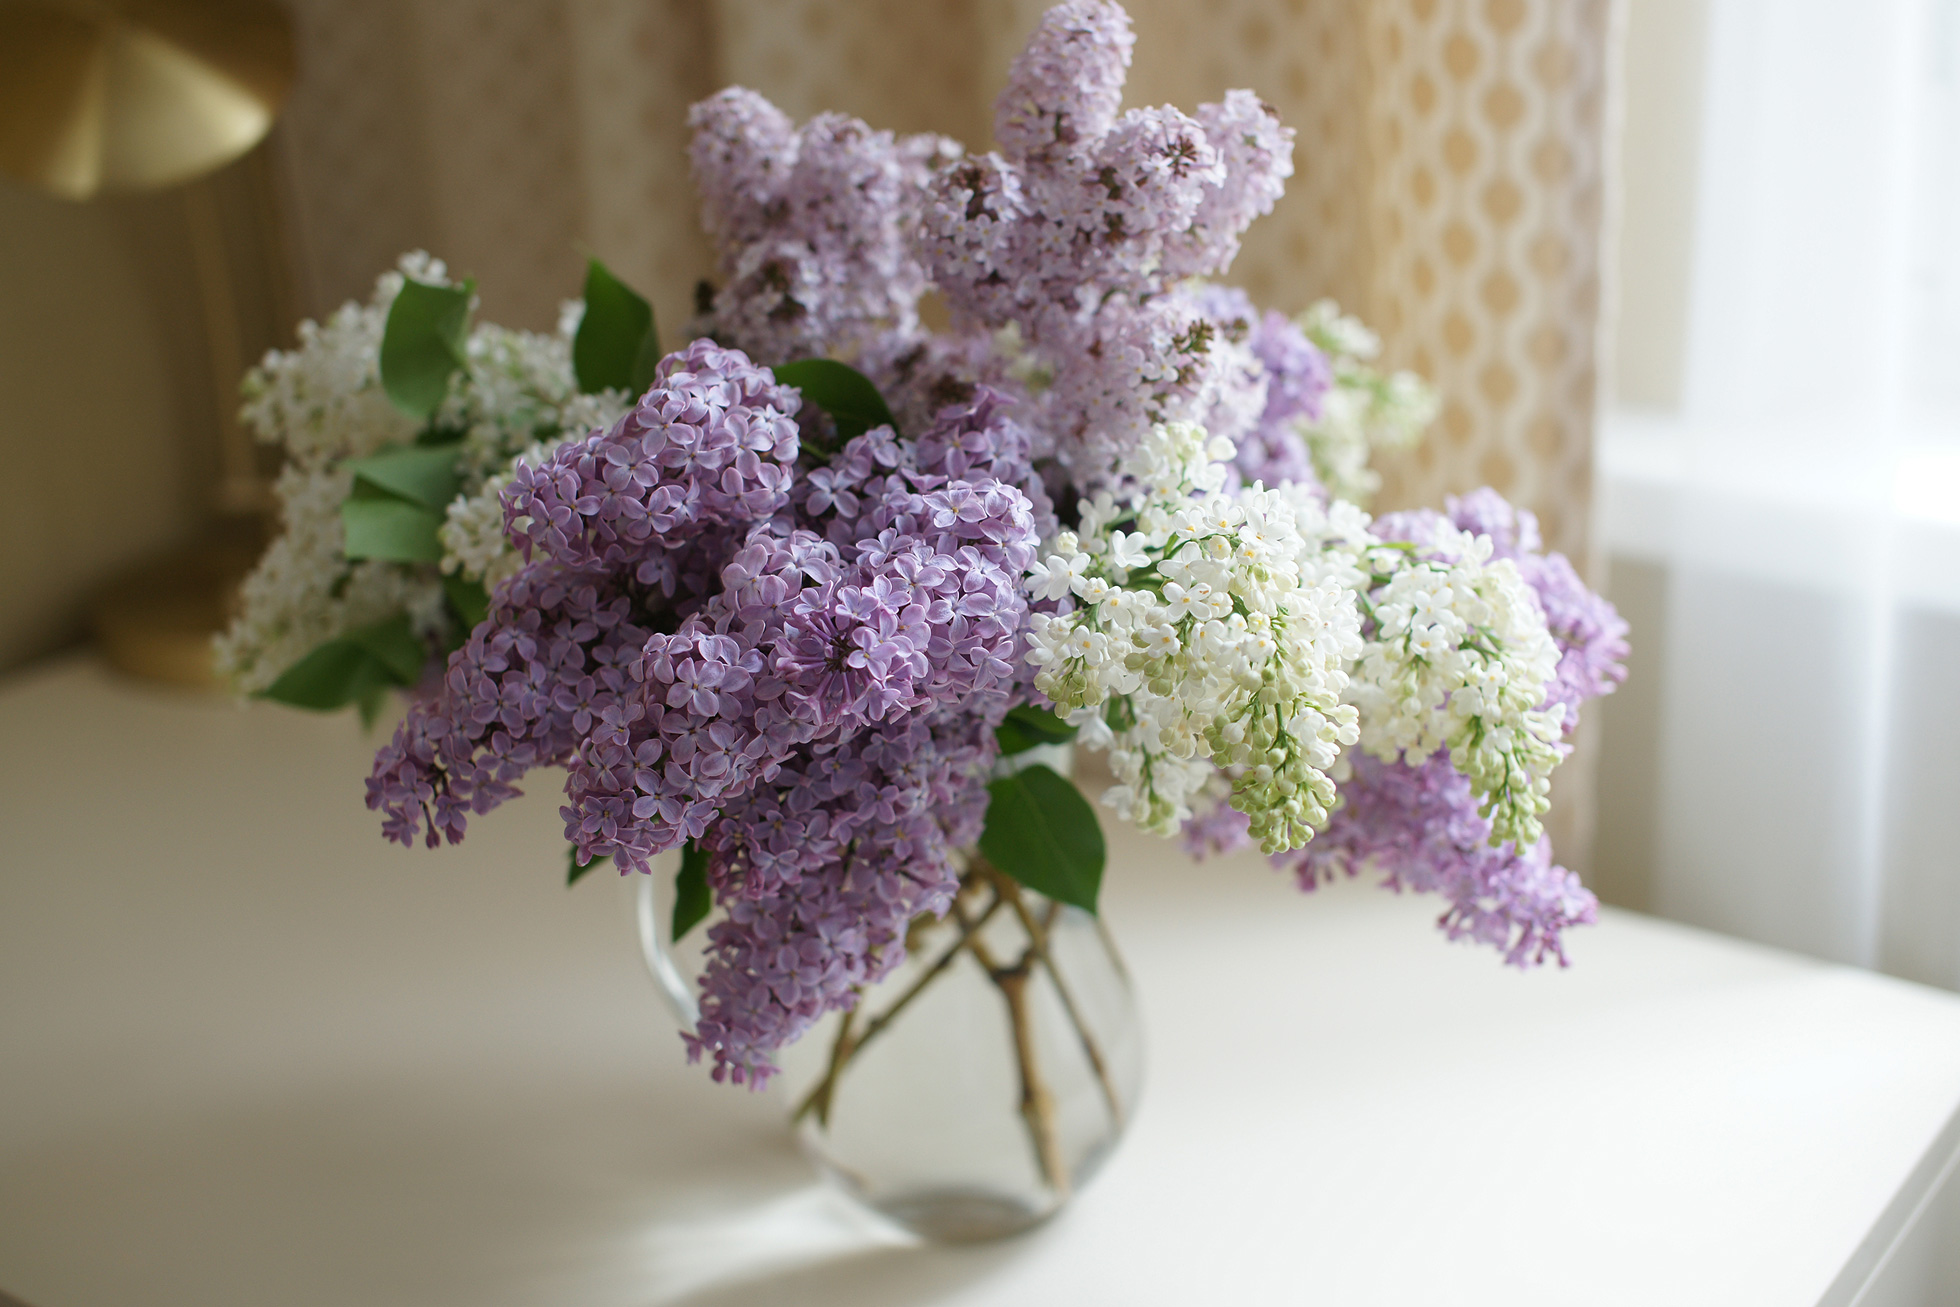 Fresh-cut lilacs in a home for sale